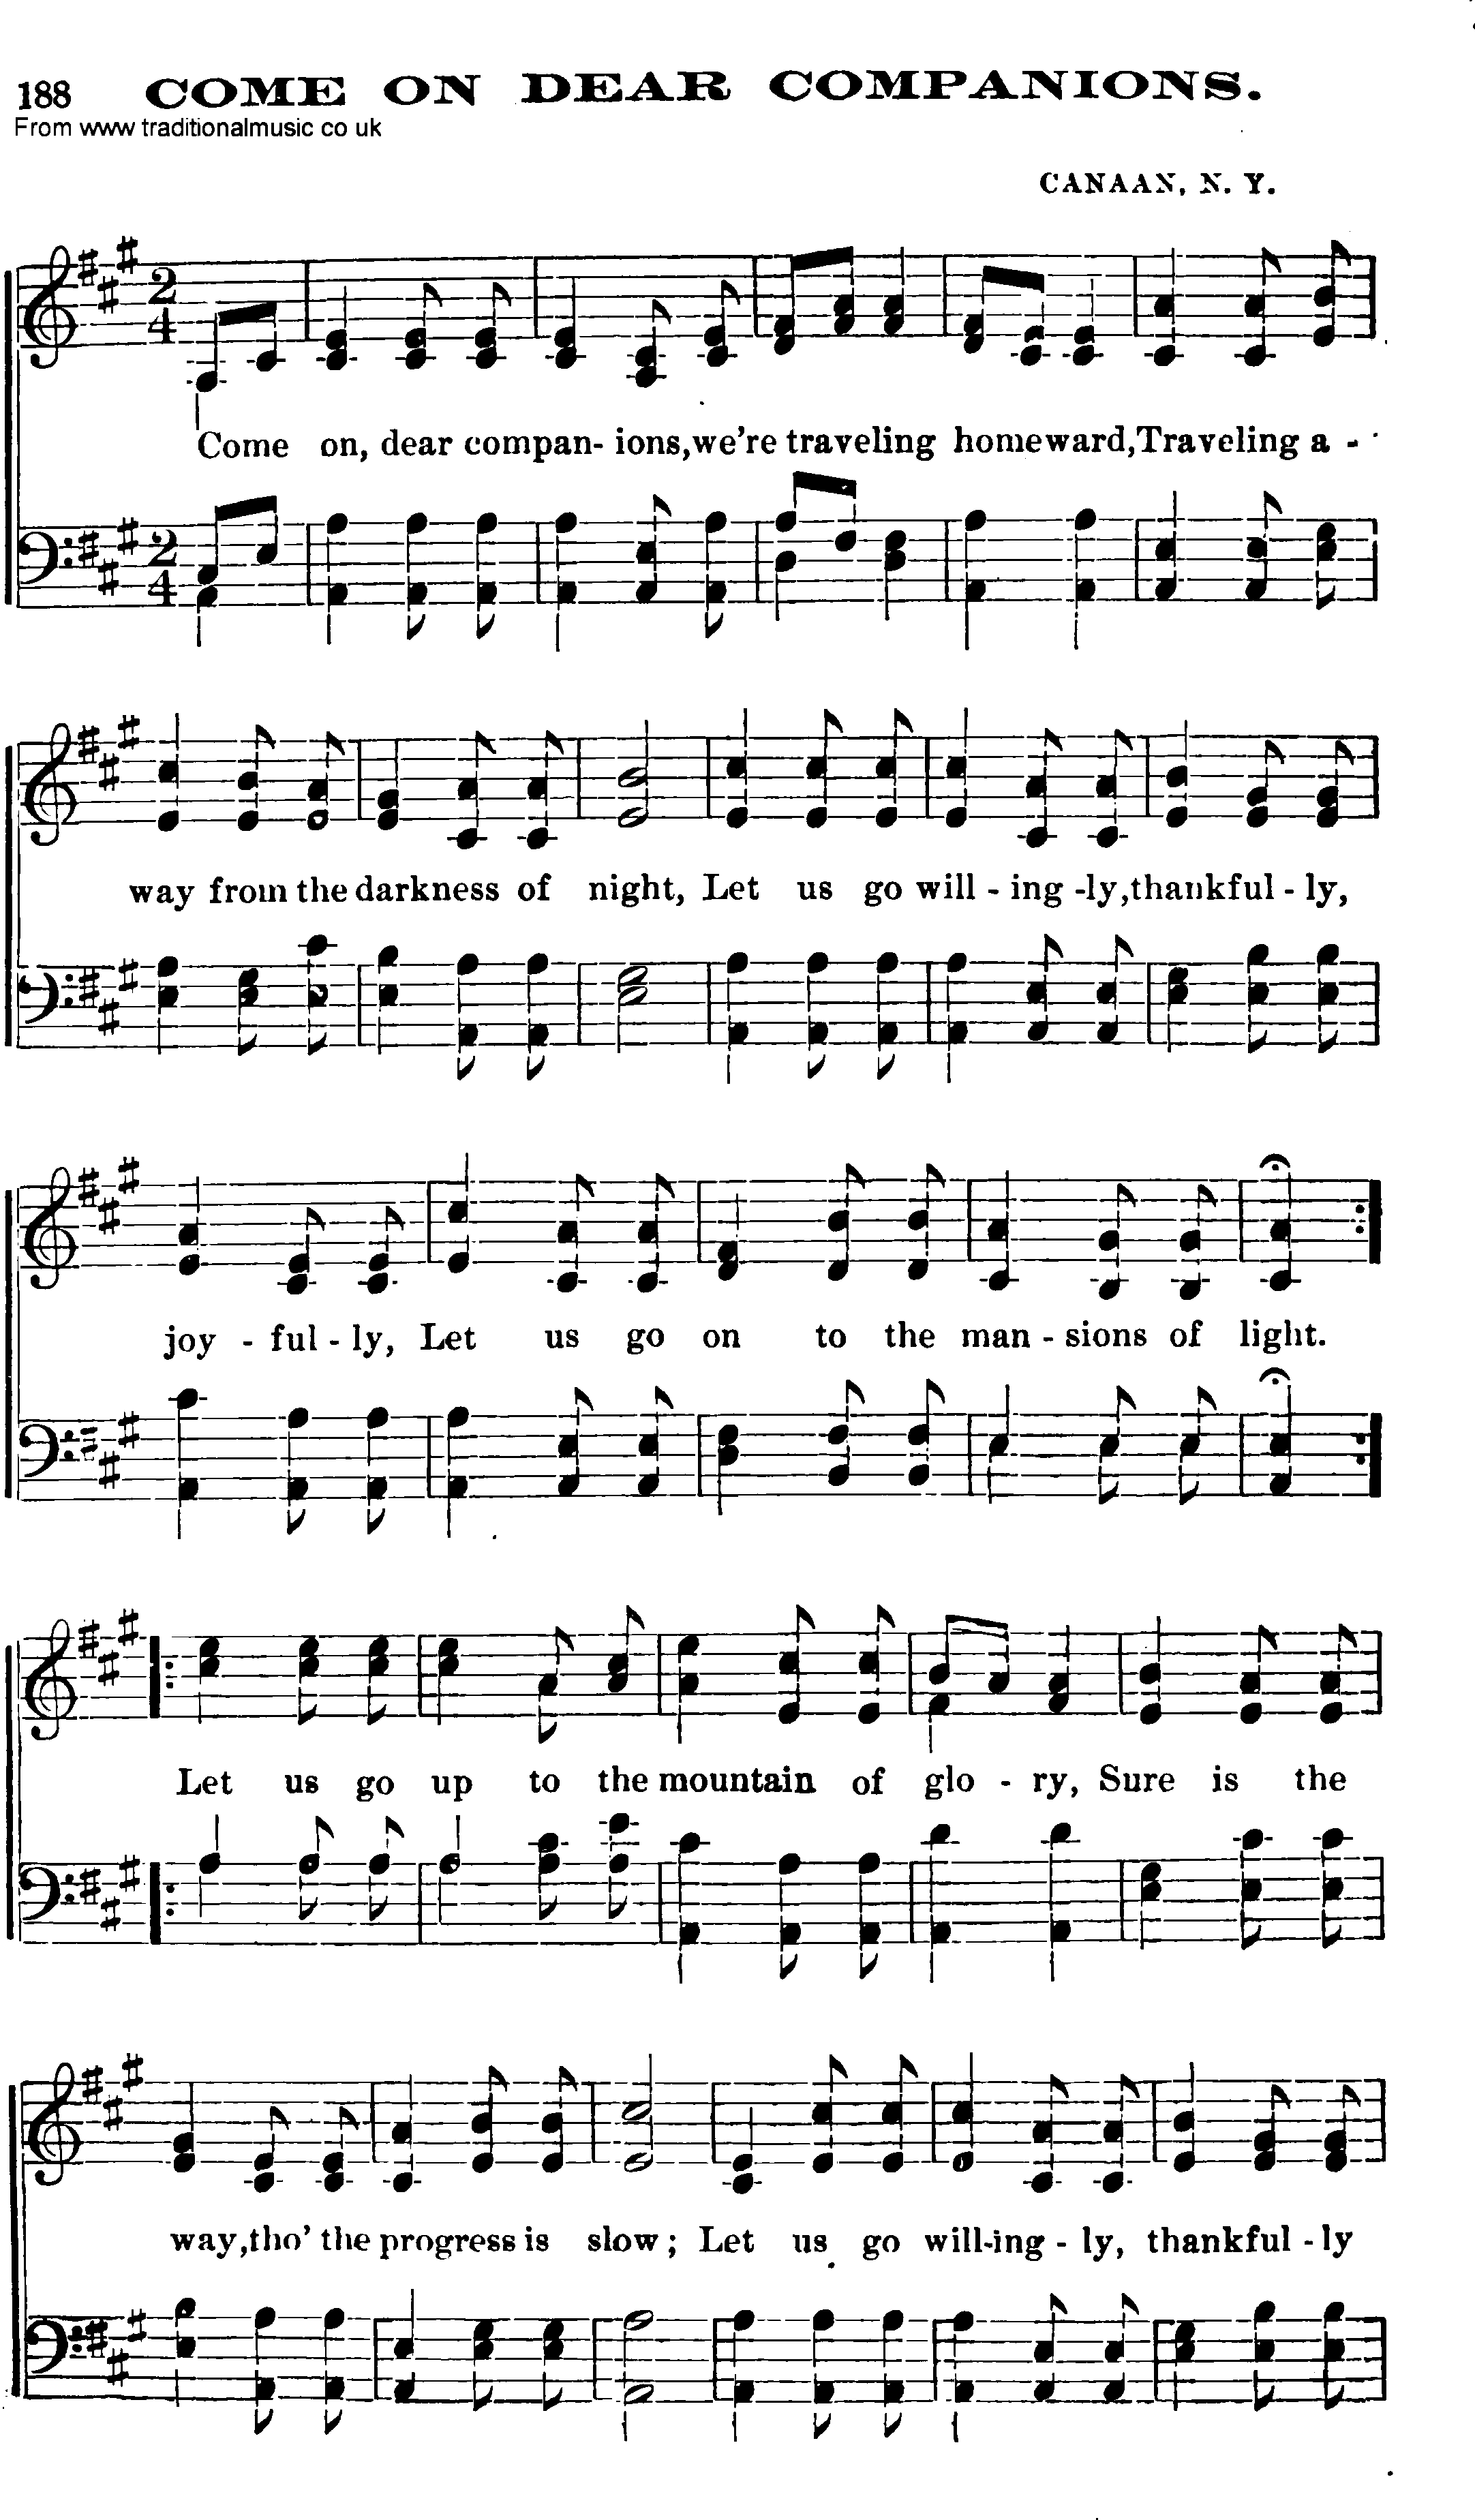 Shaker Music collection, Hymn: Come On Dear Companions, sheetmusic and PDF